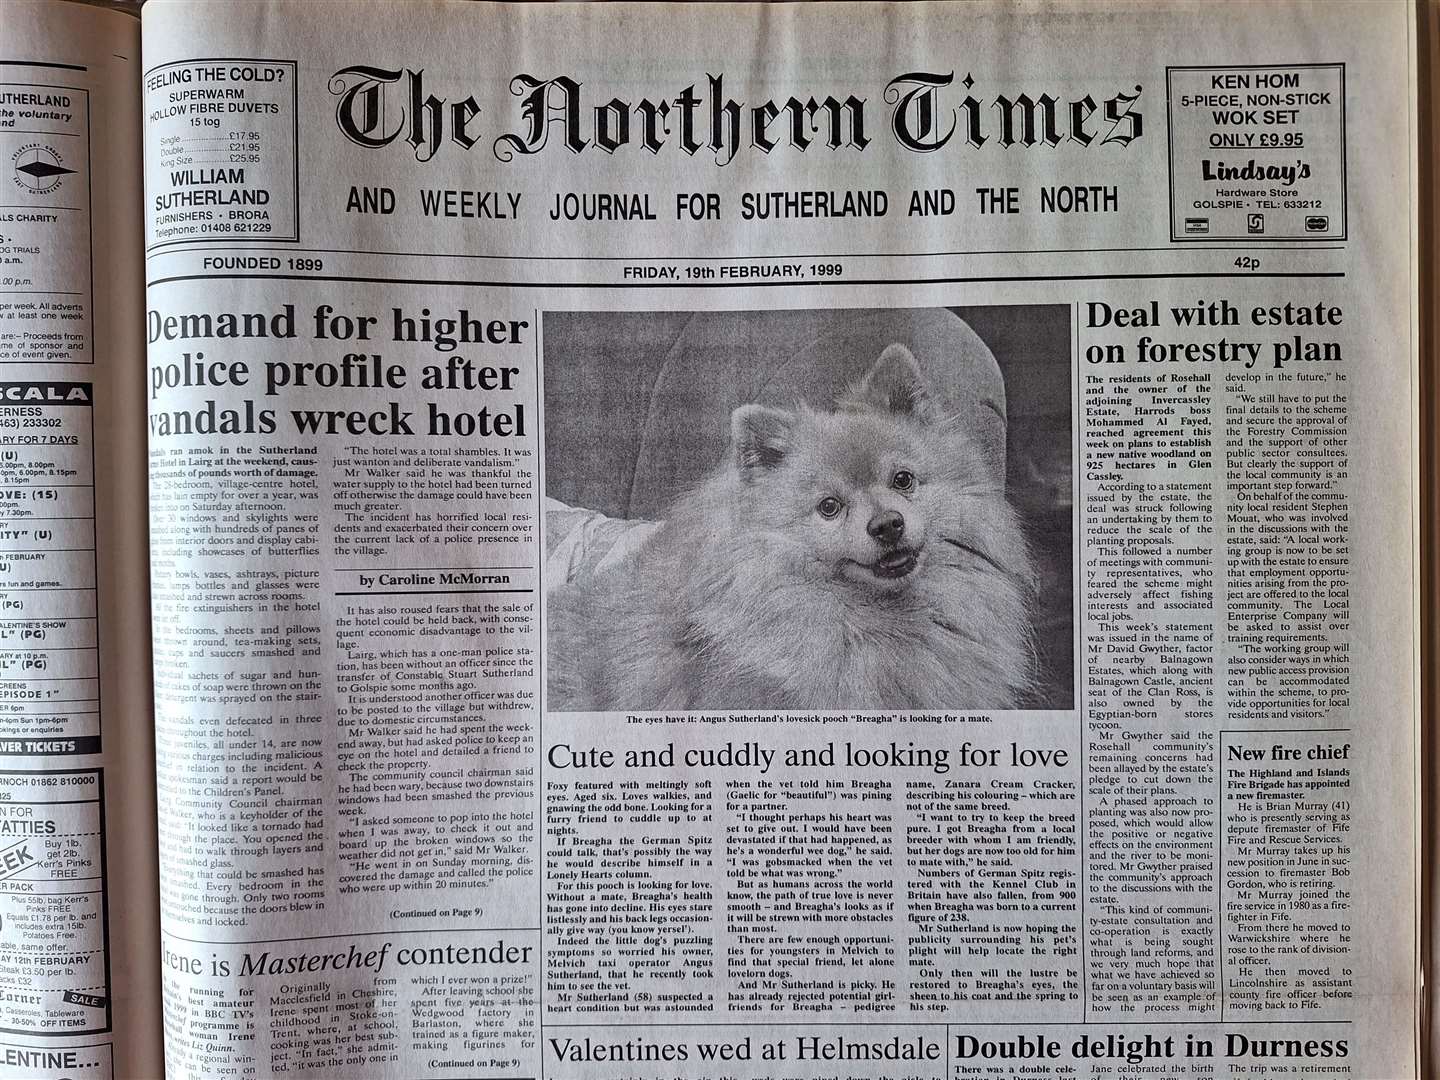 The edition of February 19, 1999.